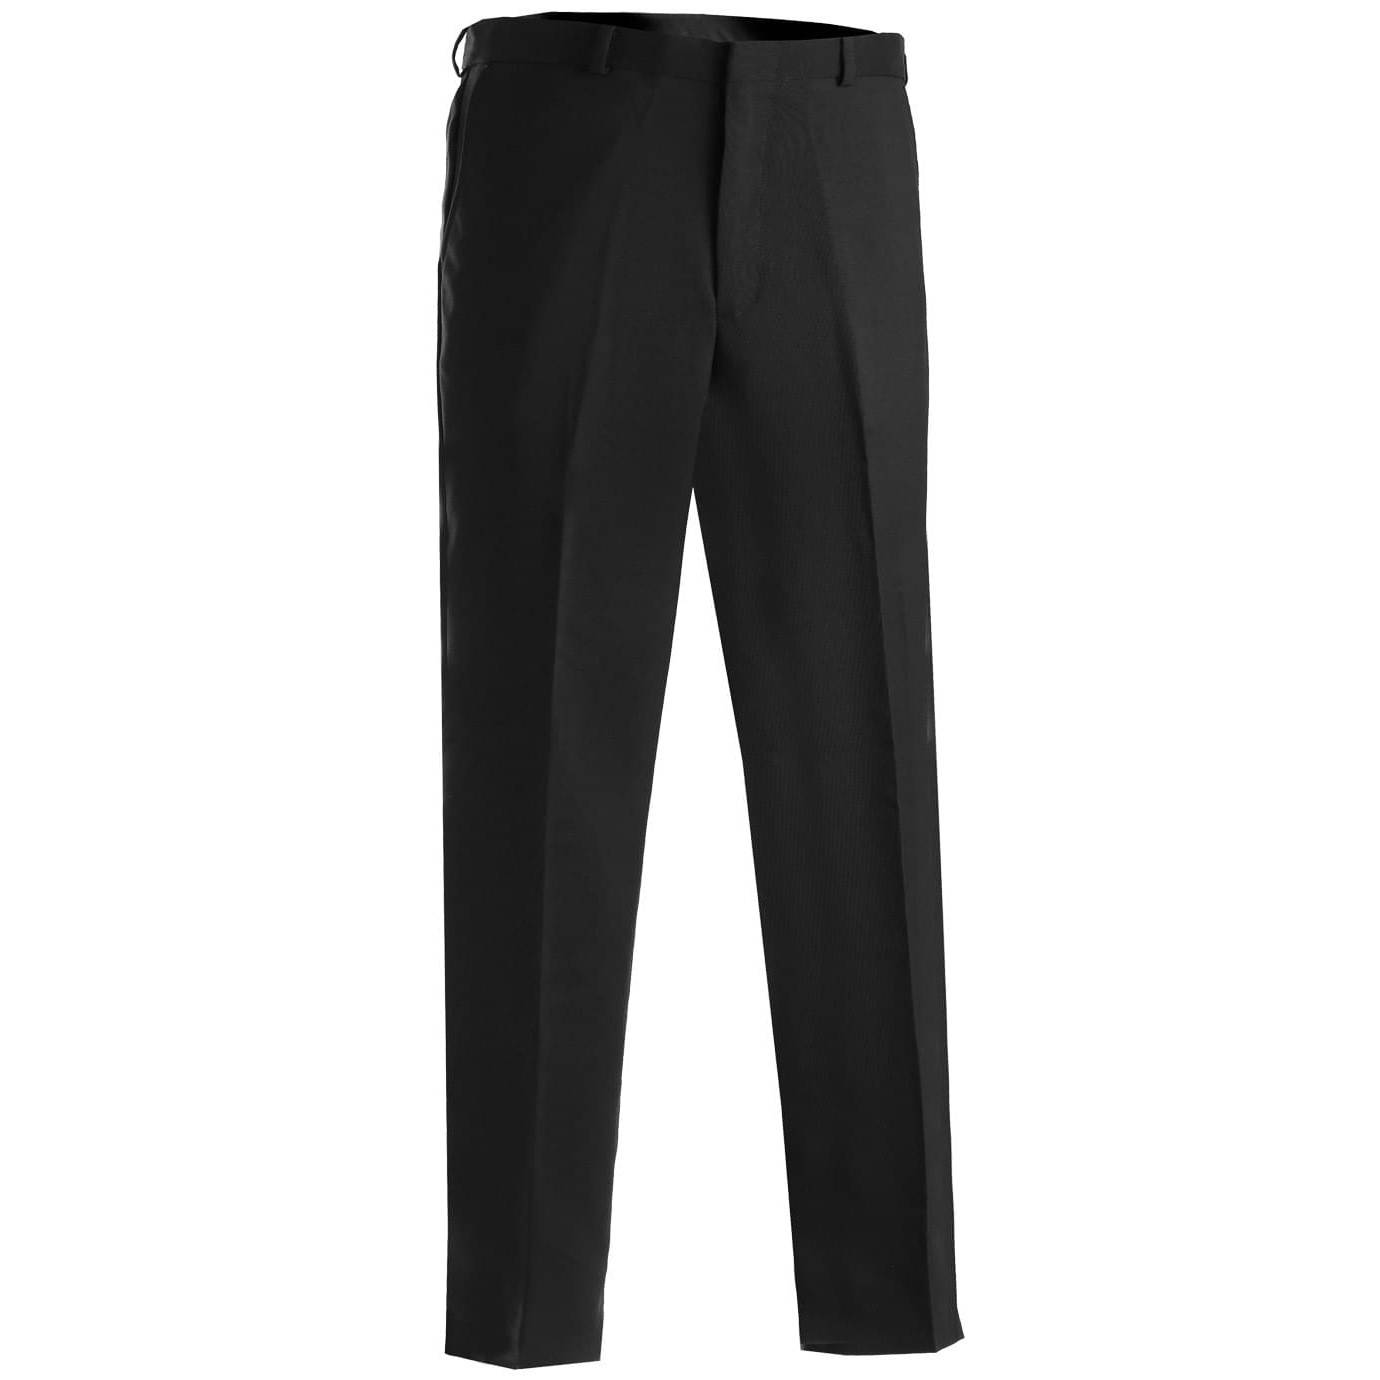 EDWARDS POLYESTER TROUSERS